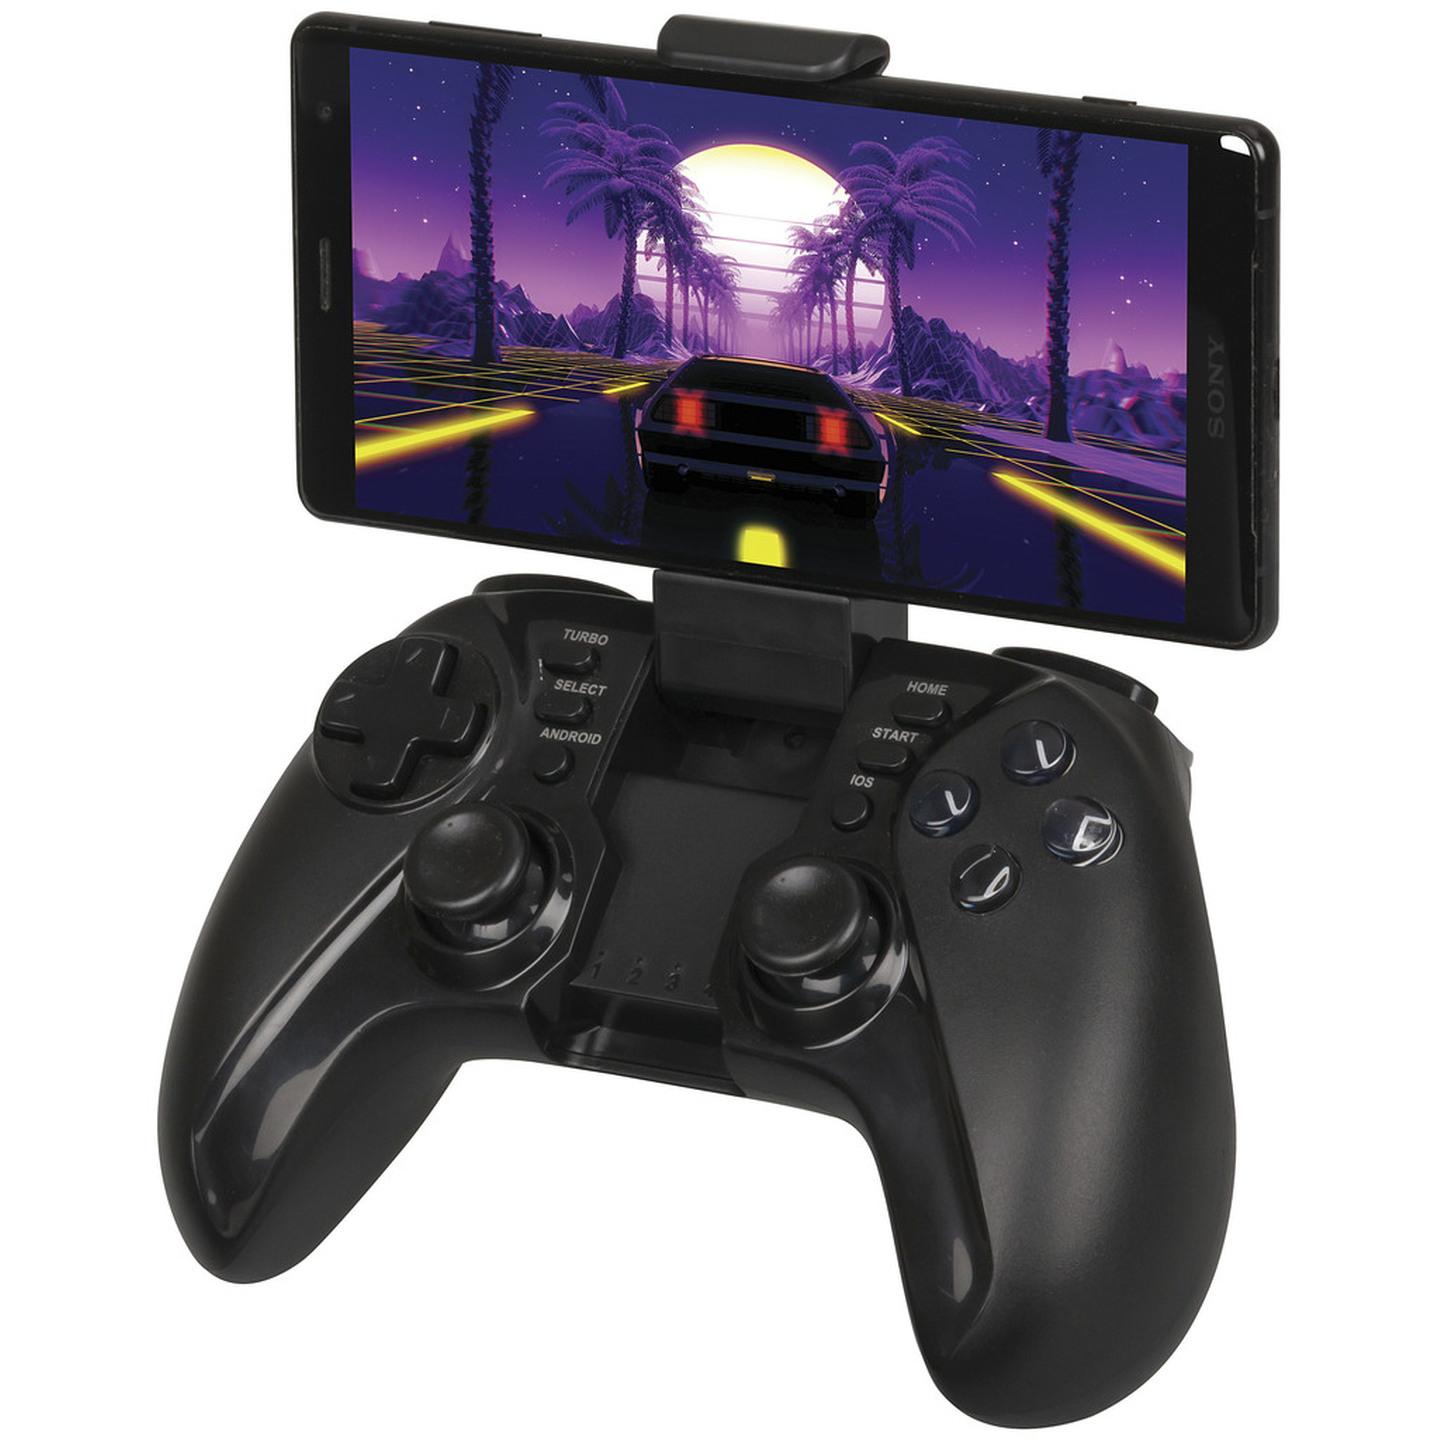 Bluetooth Game Controller for Android